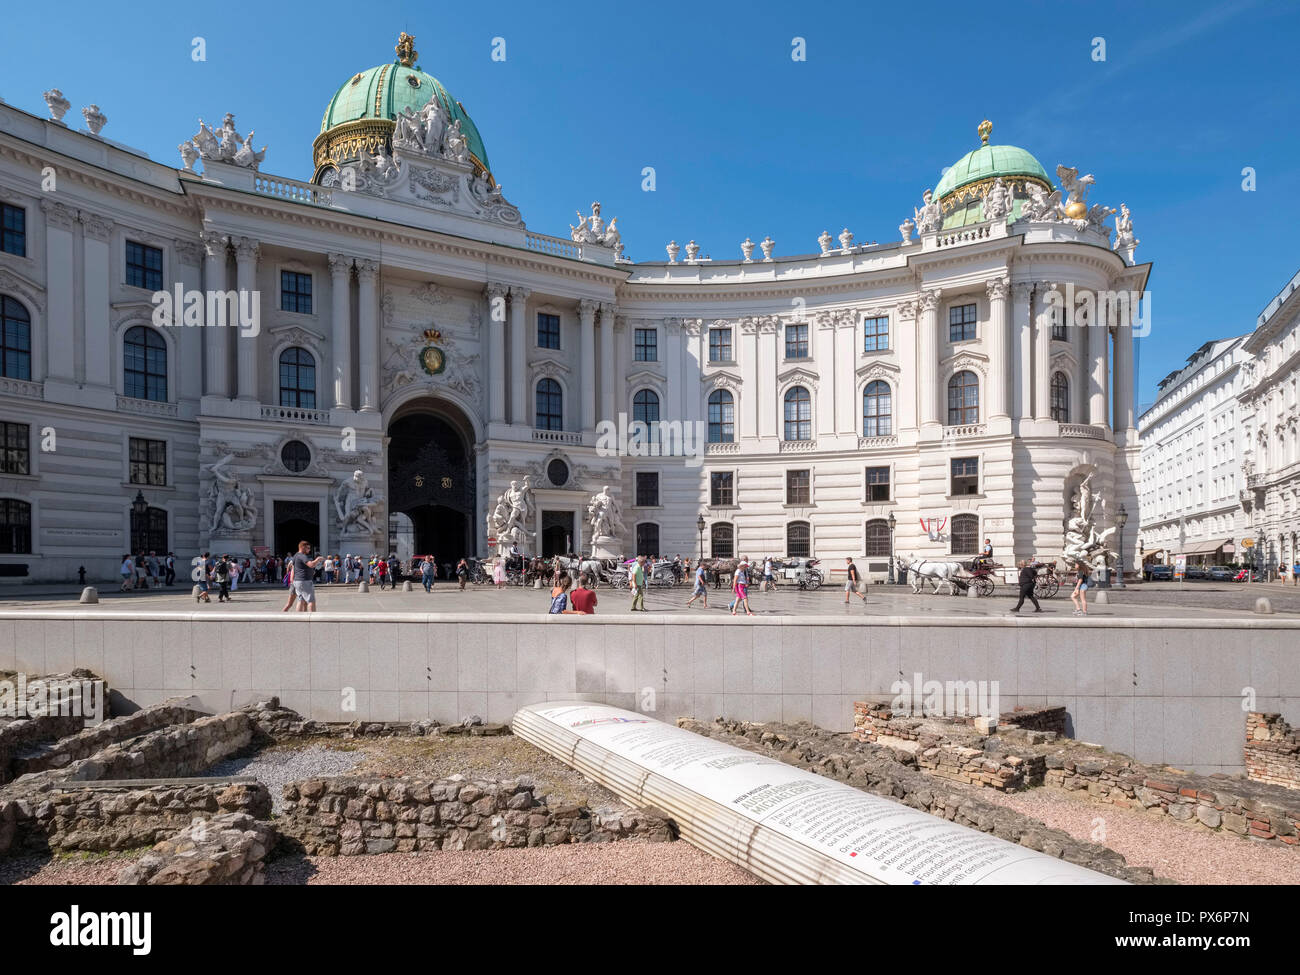 Old city walls in front of the Hofburg Imperial Palace, Vienna, Austria, Europe Stock Photo